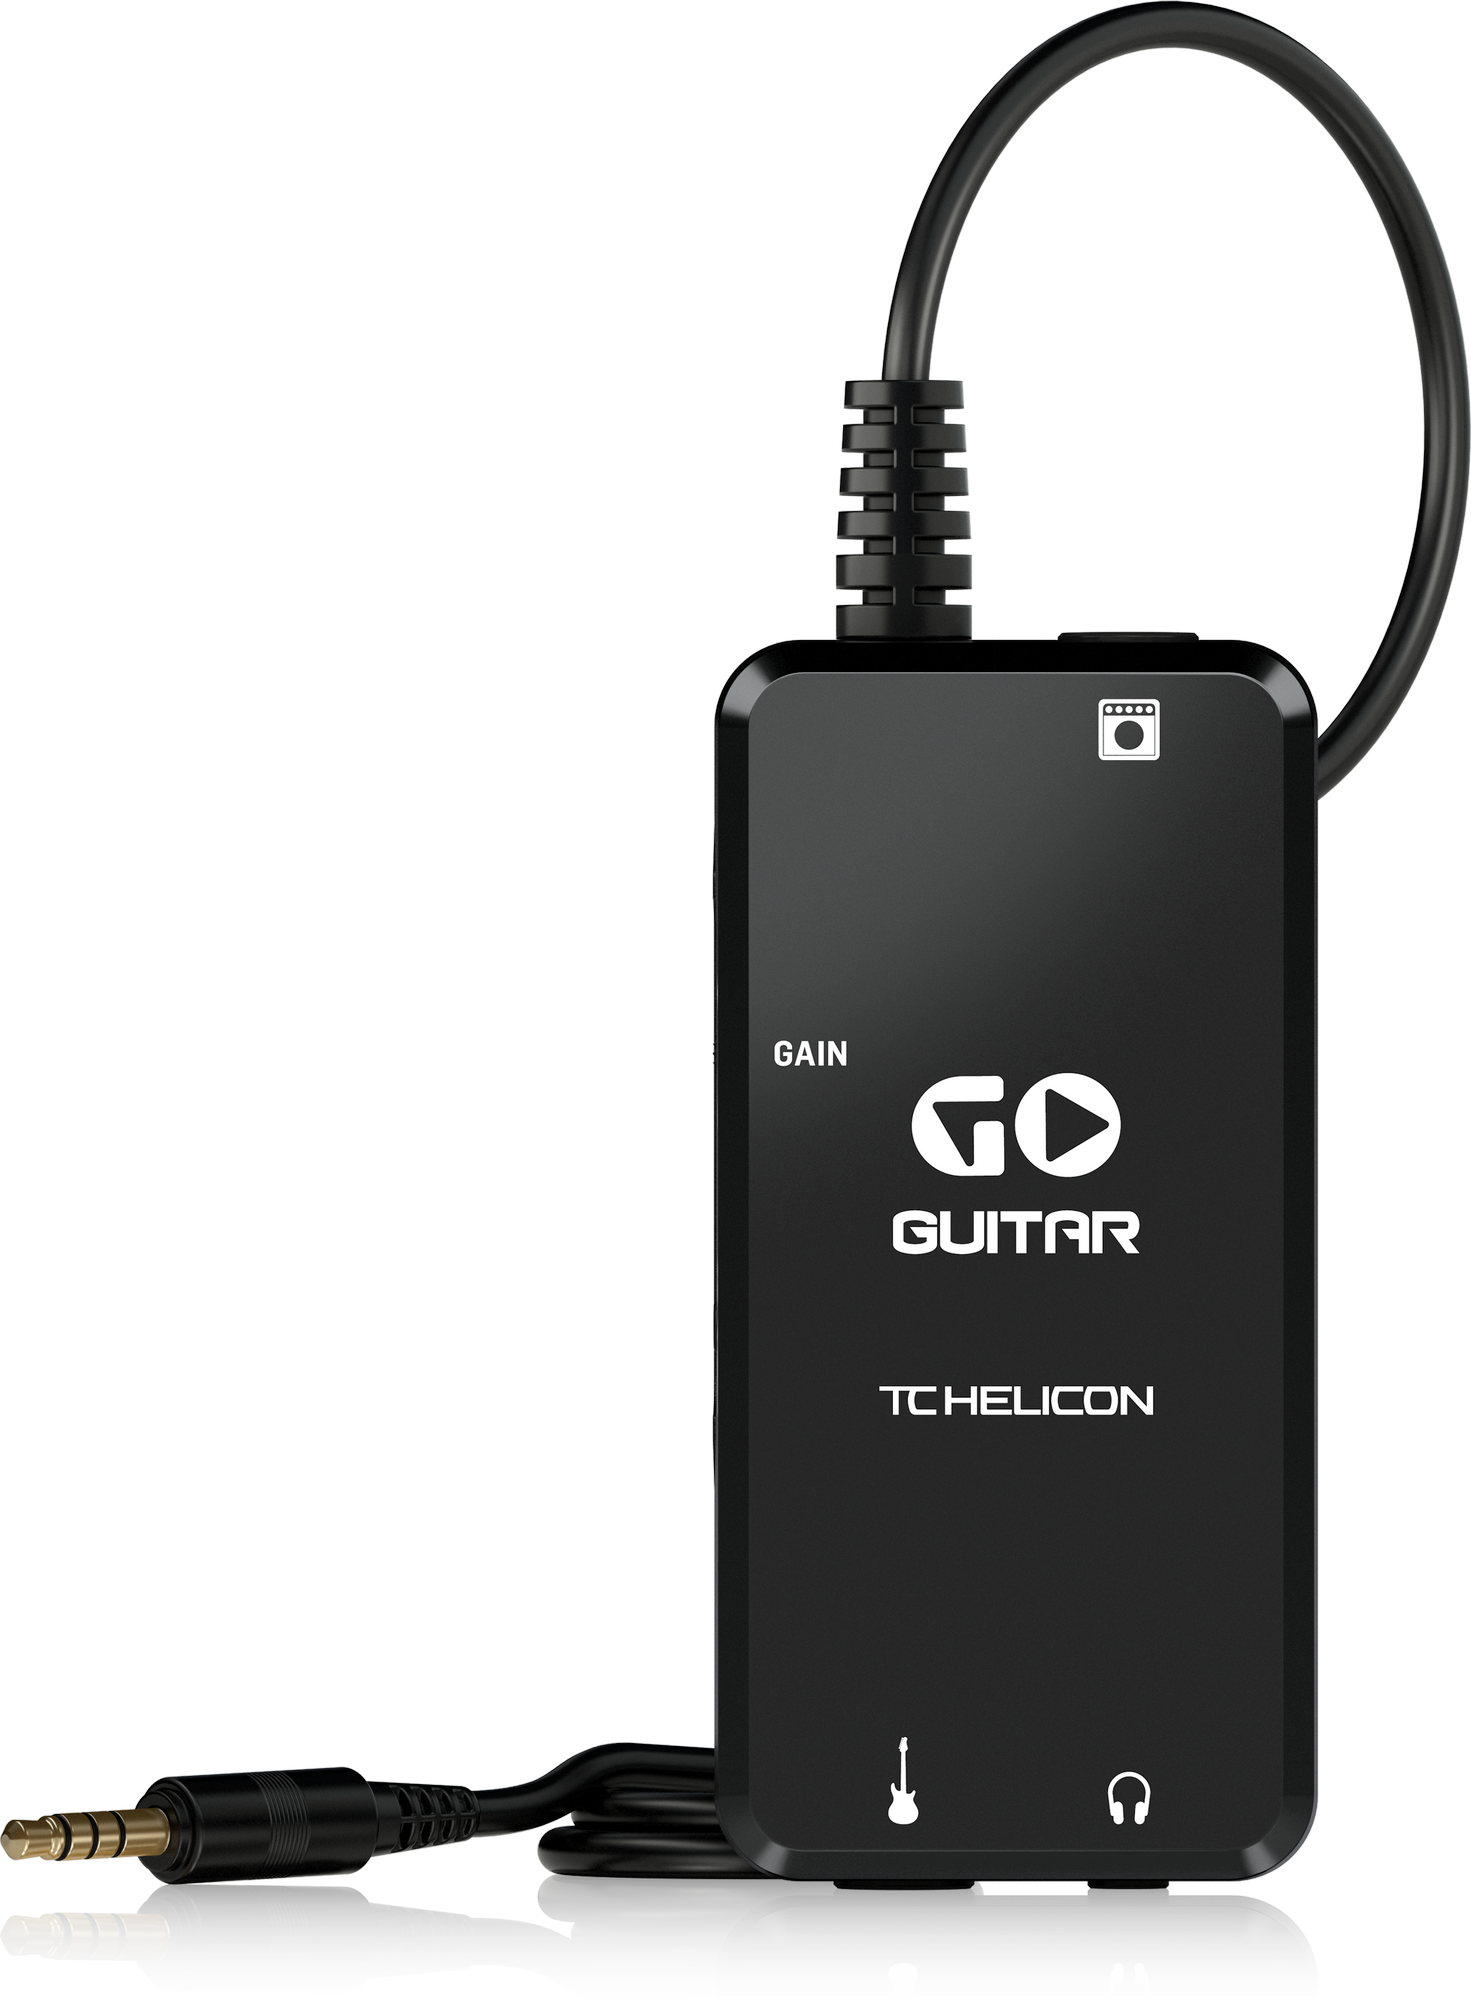 TC HELICON GO GUITAR PORTABLE GUITAR INTERFACE FOR MOBILE DEVICES, TC HELICON, AUDIO INTERFACE, tc-helicon-audio-interface-go-guitar, ZOSO MUSIC SDN BHD